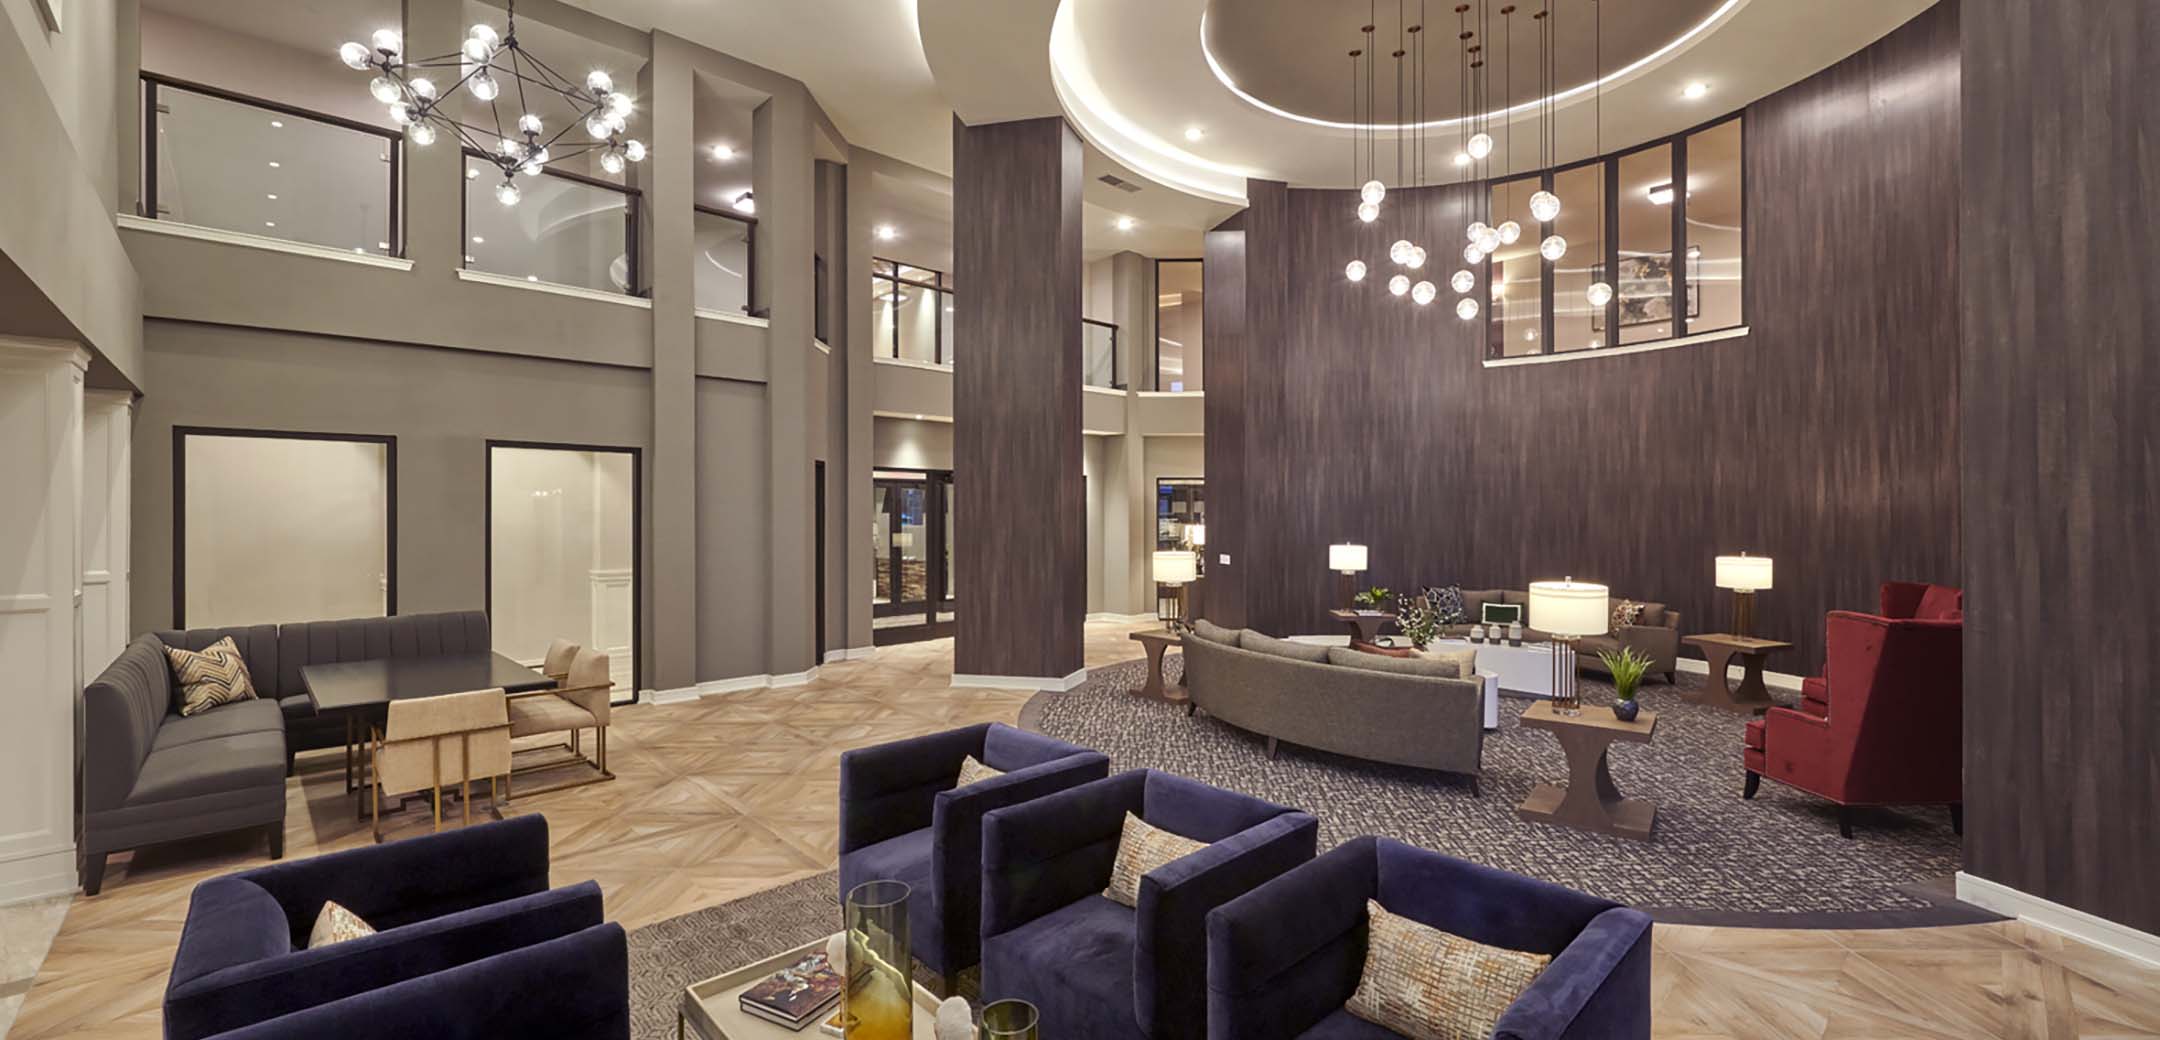 An interior view of the Granite Run Apartments building lobby sitting area, showcasing the semi-circular wood accent wall in the center and seating area in the middle.